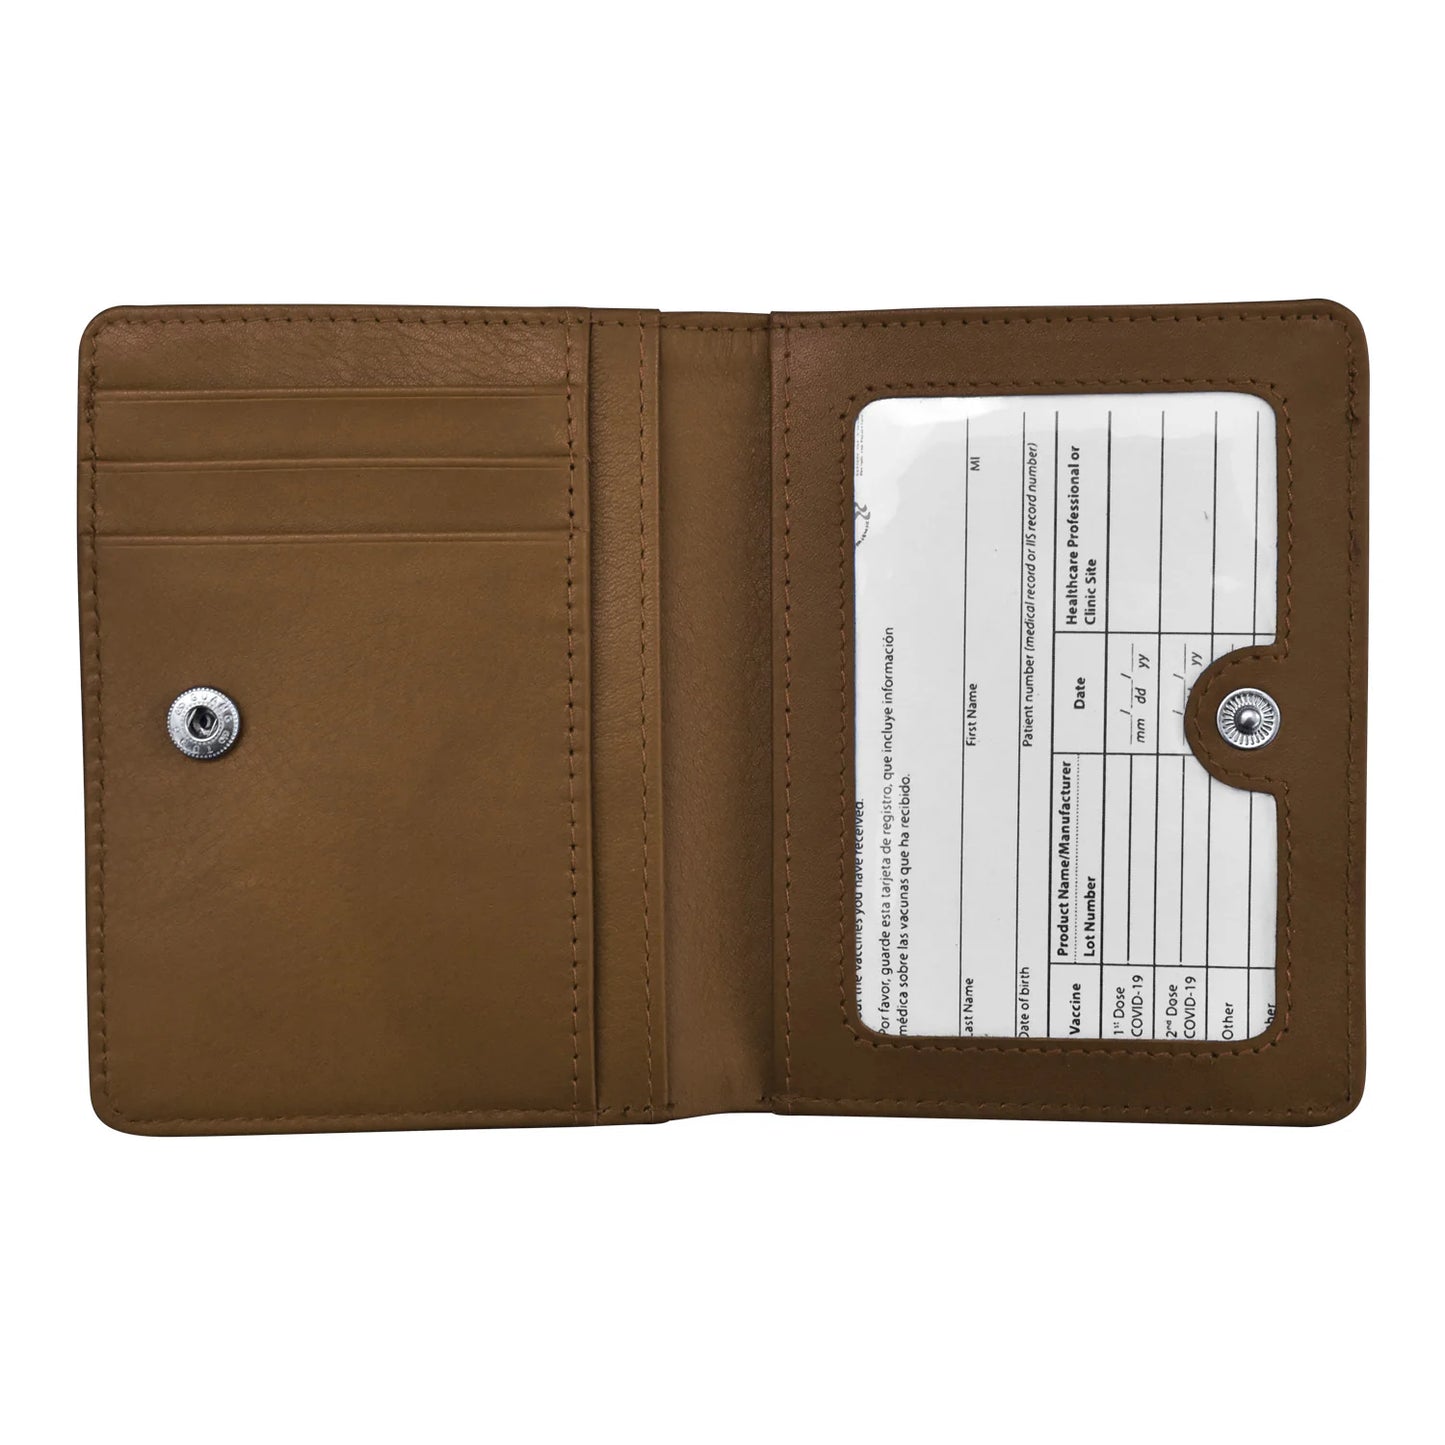 ili Vaccine Card Holder Leather Wallet (Black/Toffee)